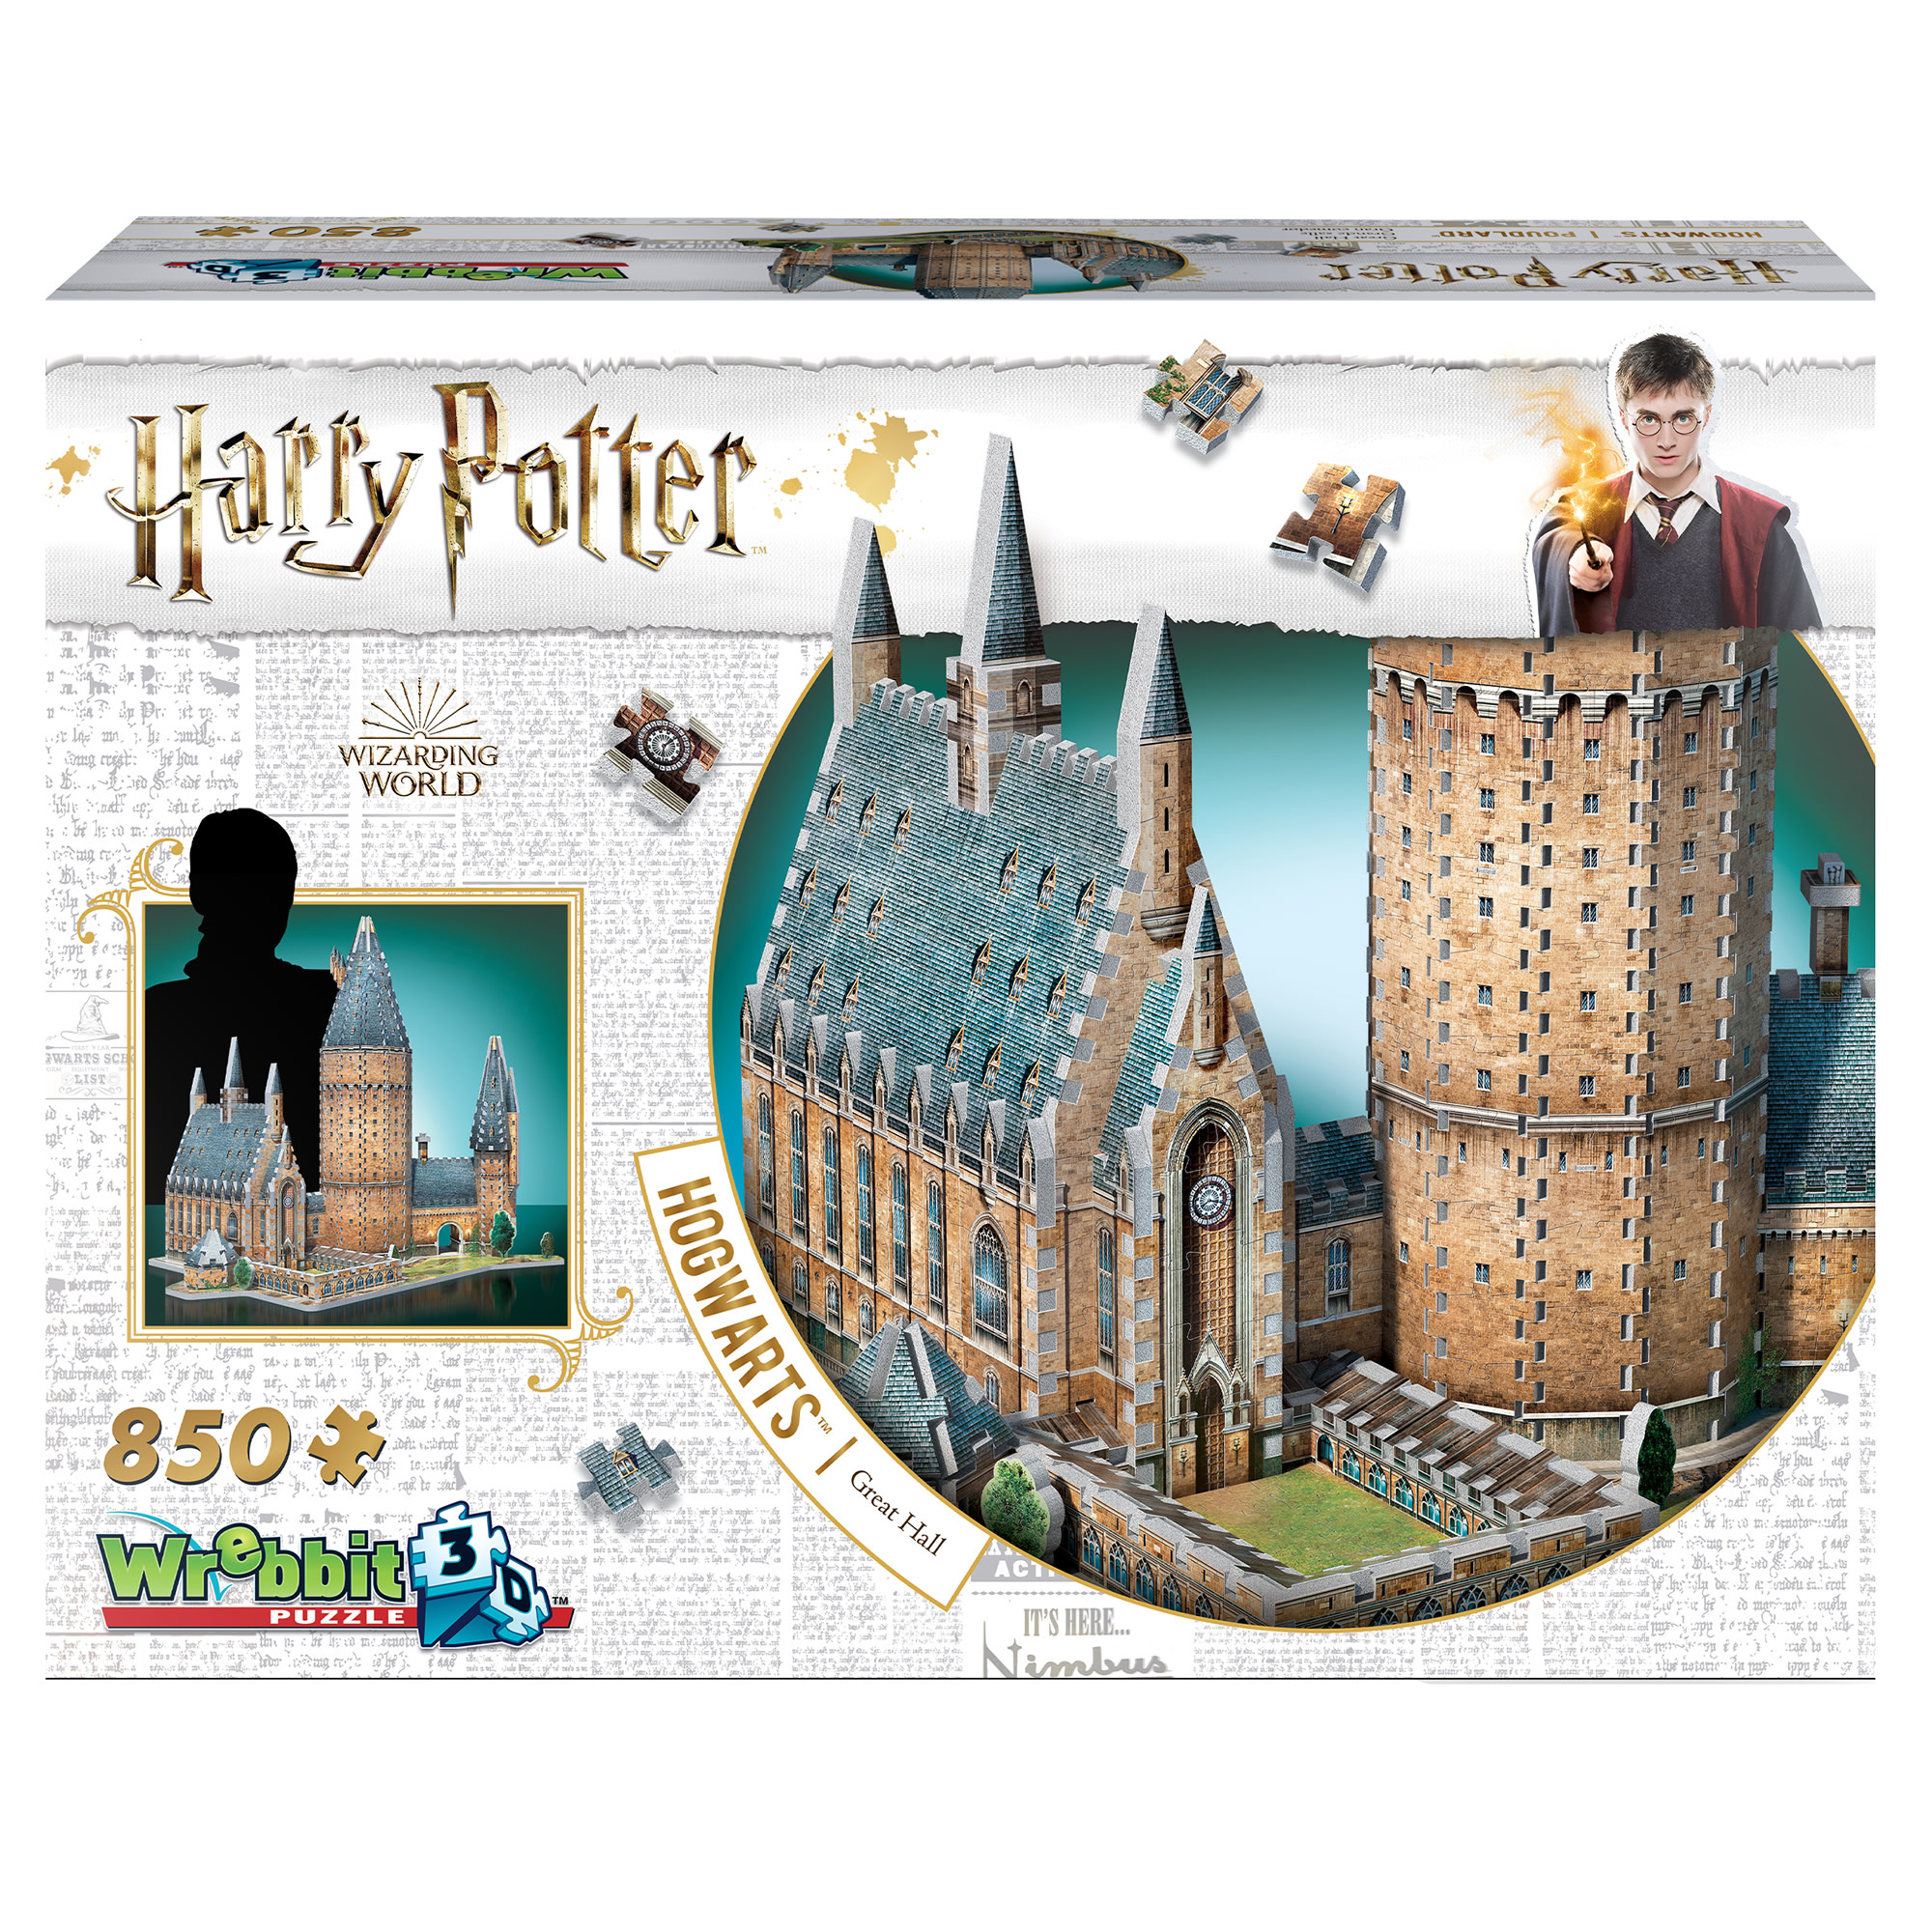 Wrebbit 3D - Harry Potter Hogwarts Great Hall 850 Piece 3D Jigsaw Puzzle - image 1 of 10